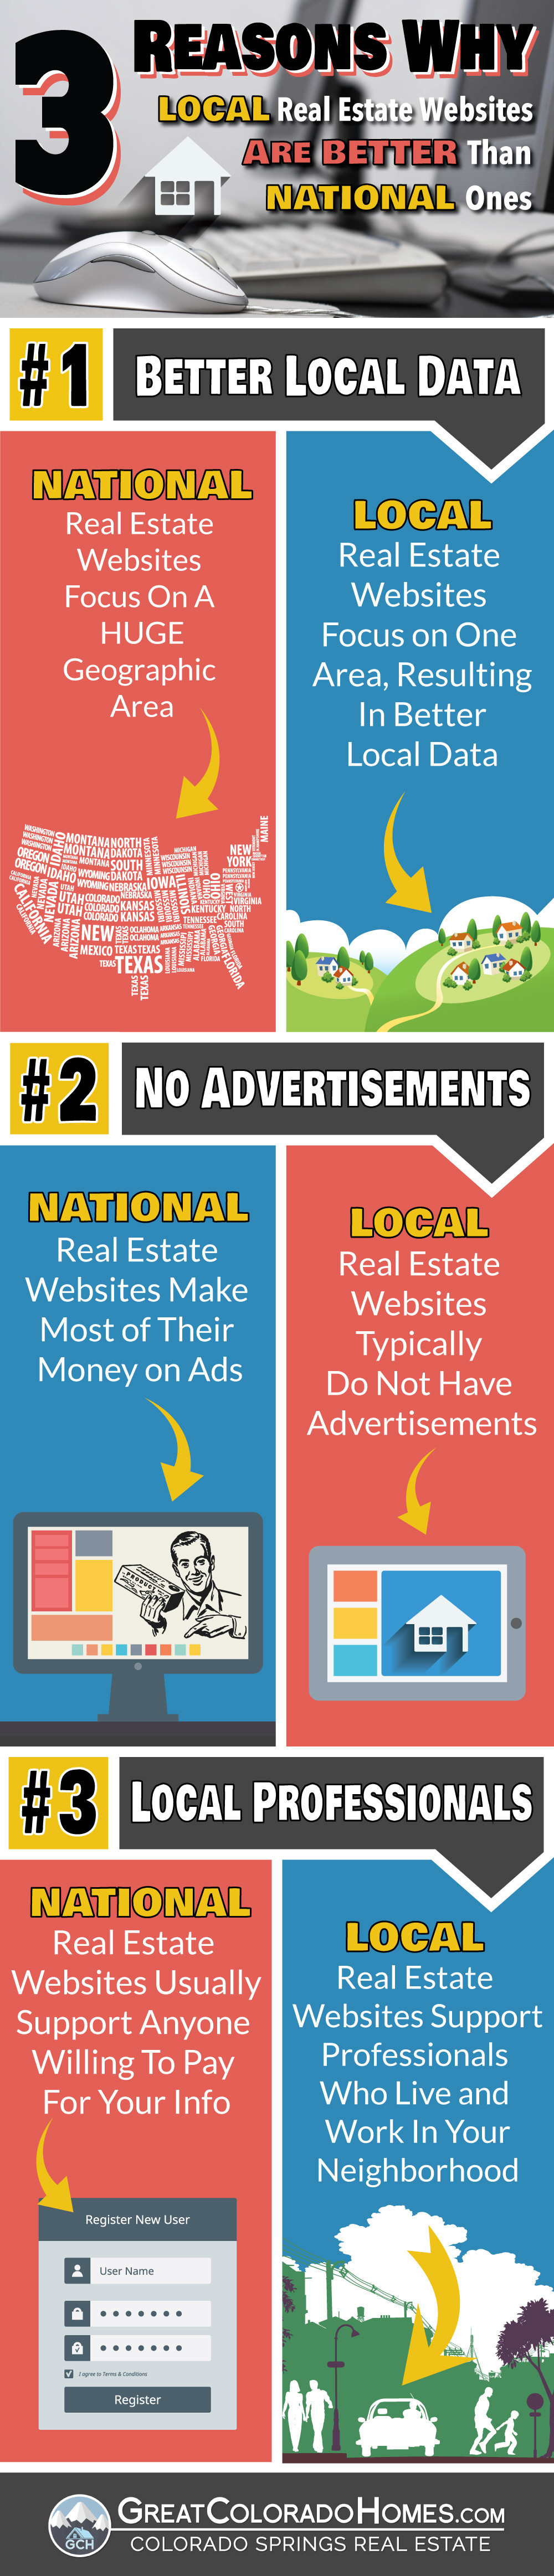 3 Reasons Why Local Real Estate Websites are Better Than National Ones